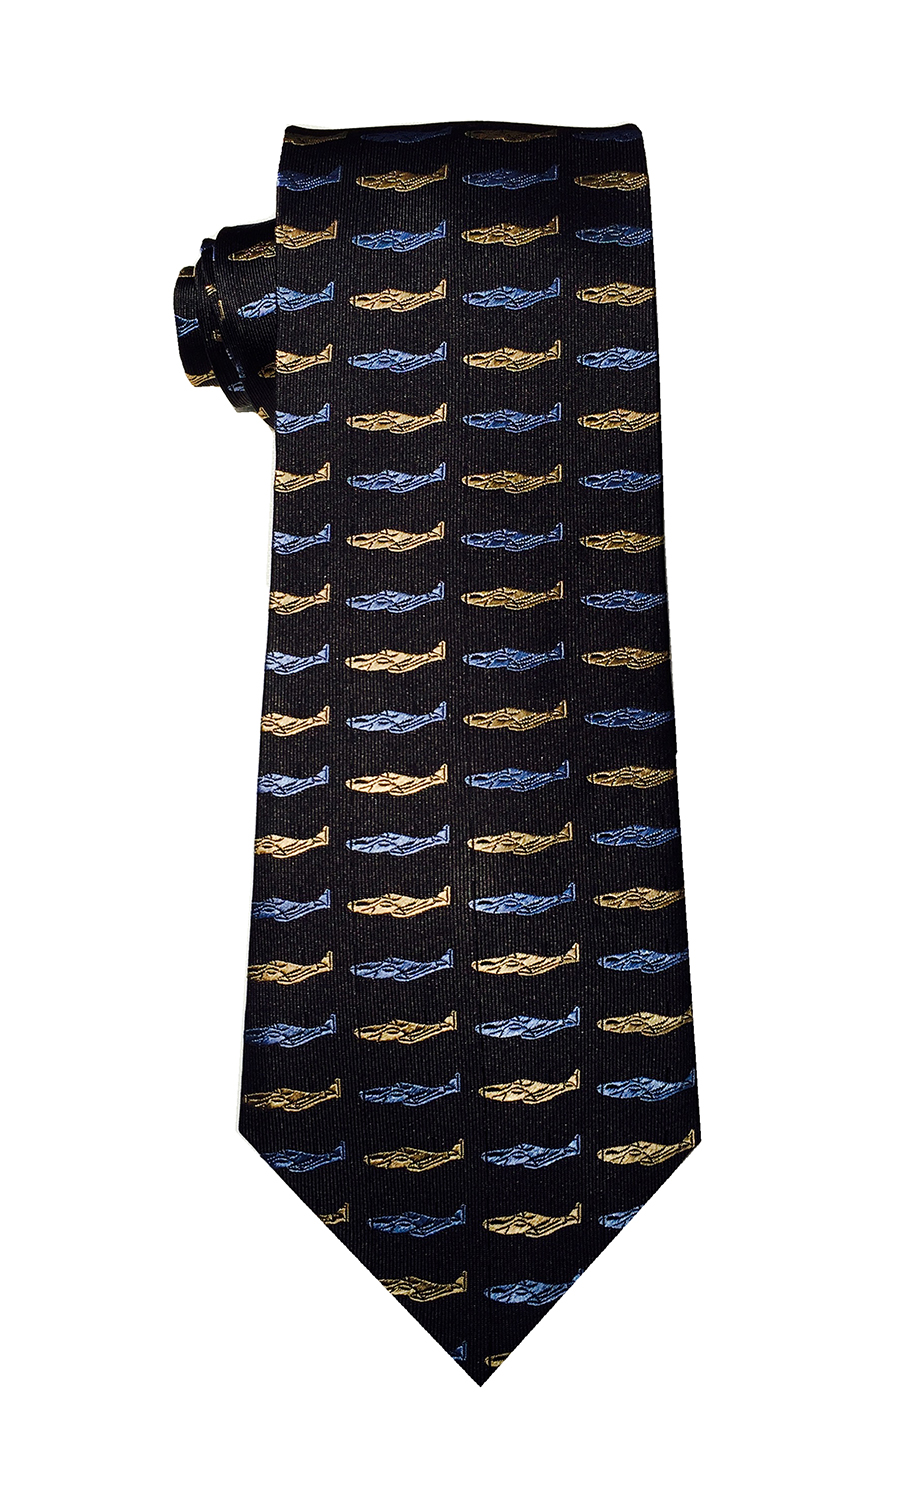 P-51 Mustang fighter airplane tie in midnight